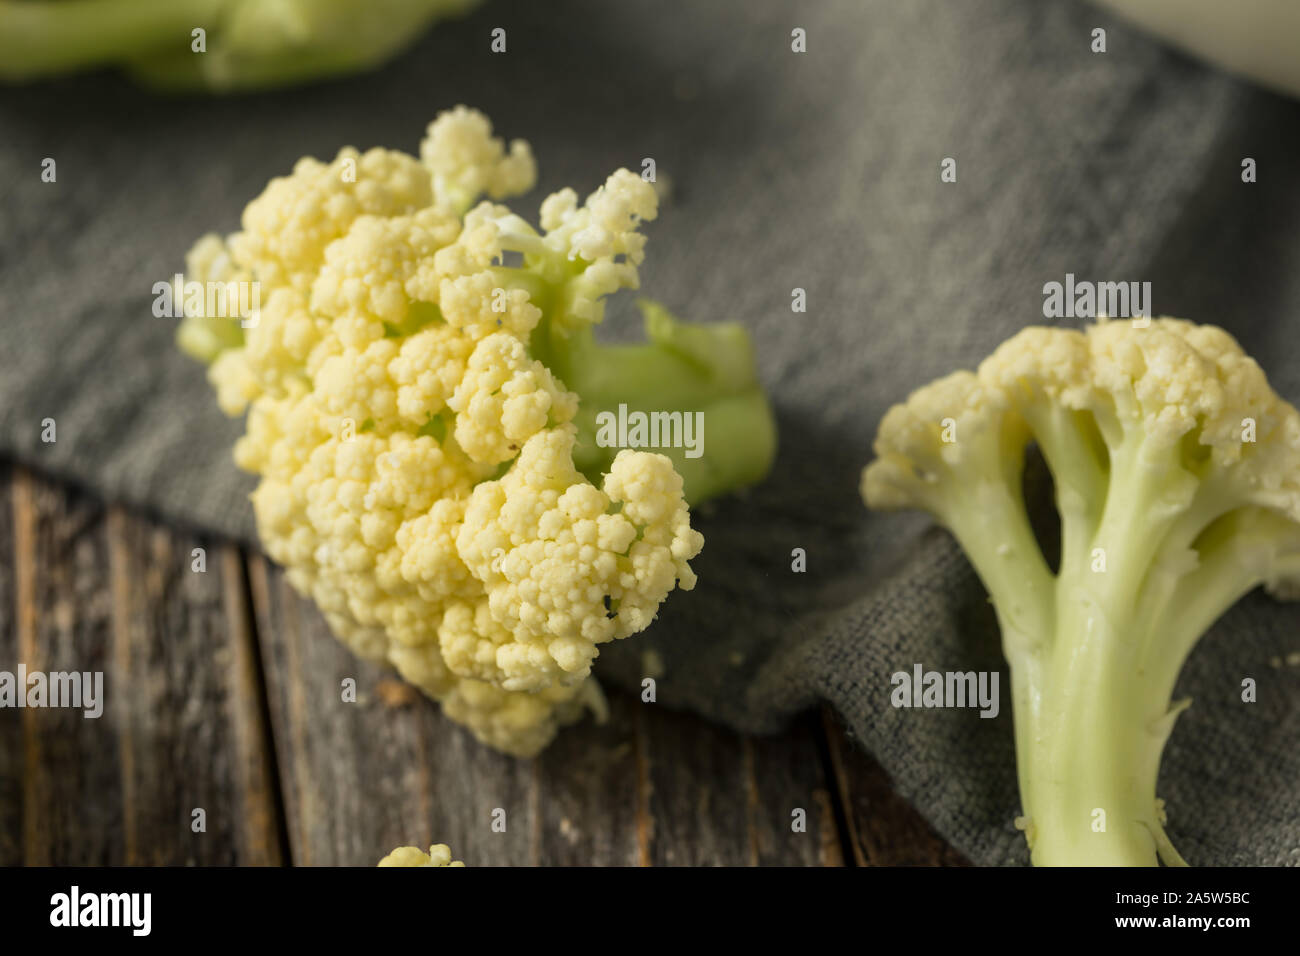 Raw White Baby Cauliflower Florets in a Bowl Stock Photo